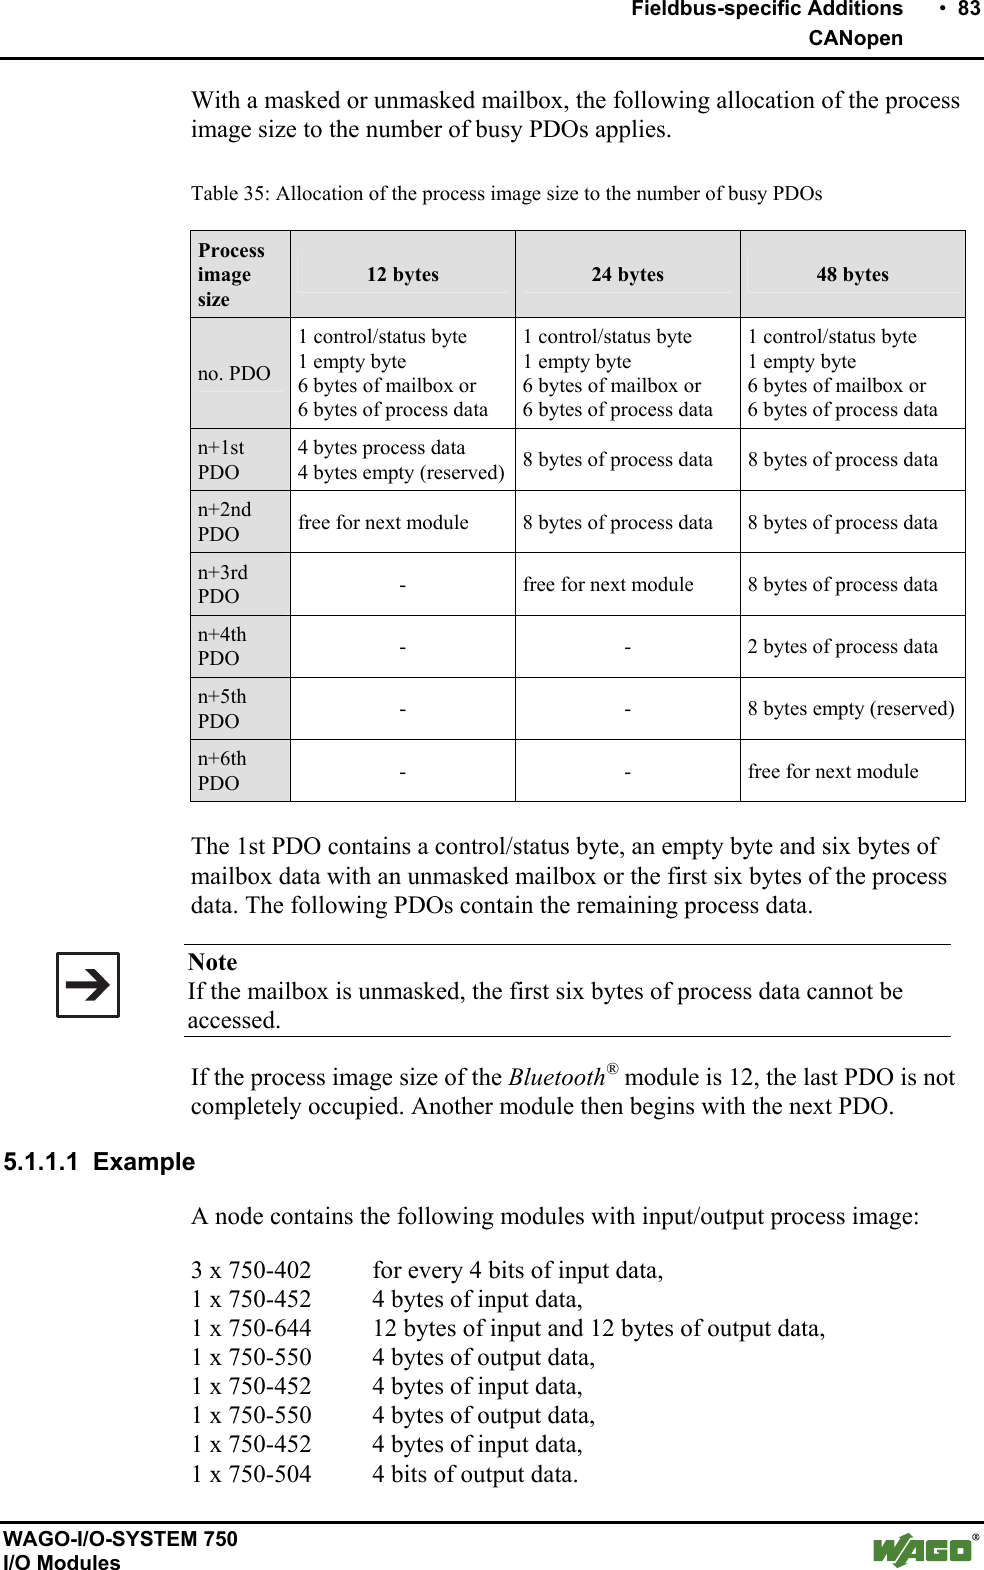    Fieldbus-specific Additions    •  83    CANopen  WAGO-I/O-SYSTEM 750 I/O Modules With a masked or unmasked mailbox, the following allocation of the process image size to the number of busy PDOs applies.  Table 35: Allocation of the process image size to the number of busy PDOs Process image size 12 bytes  24 bytes  48 bytes no. PDO 1 control/status byte 1 empty byte 6 bytes of mailbox or  6 bytes of process data 1 control/status byte 1 empty byte 6 bytes of mailbox or  6 bytes of process data 1 control/status byte 1 empty byte 6 bytes of mailbox or  6 bytes of process data n+1st PDO 4 bytes process data 4 bytes empty (reserved) 8 bytes of process data  8 bytes of process data n+2nd PDO  free for next module  8 bytes of process data  8 bytes of process data n+3rd PDO  -  free for next module  8 bytes of process data n+4th PDO  -  -  2 bytes of process data n+5th PDO  -  -  8 bytes empty (reserved)n+6th PDO  -  -  free for next module  The 1st PDO contains a control/status byte, an empty byte and six bytes of mailbox data with an unmasked mailbox or the first six bytes of the process data. The following PDOs contain the remaining process data.  Note If the mailbox is unmasked, the first six bytes of process data cannot be accessed. If the process image size of the Bluetooth® module is 12, the last PDO is not completely occupied. Another module then begins with the next PDO. 5.1.1.1 Example A node contains the following modules with input/output process image: 3 x 750-402  for every 4 bits of input data, 1 x 750-452  4 bytes of input data, 1 x 750-644  12 bytes of input and 12 bytes of output data, 1 x 750-550  4 bytes of output data, 1 x 750-452  4 bytes of input data, 1 x 750-550  4 bytes of output data, 1 x 750-452  4 bytes of input data, 1 x 750-504  4 bits of output data. 